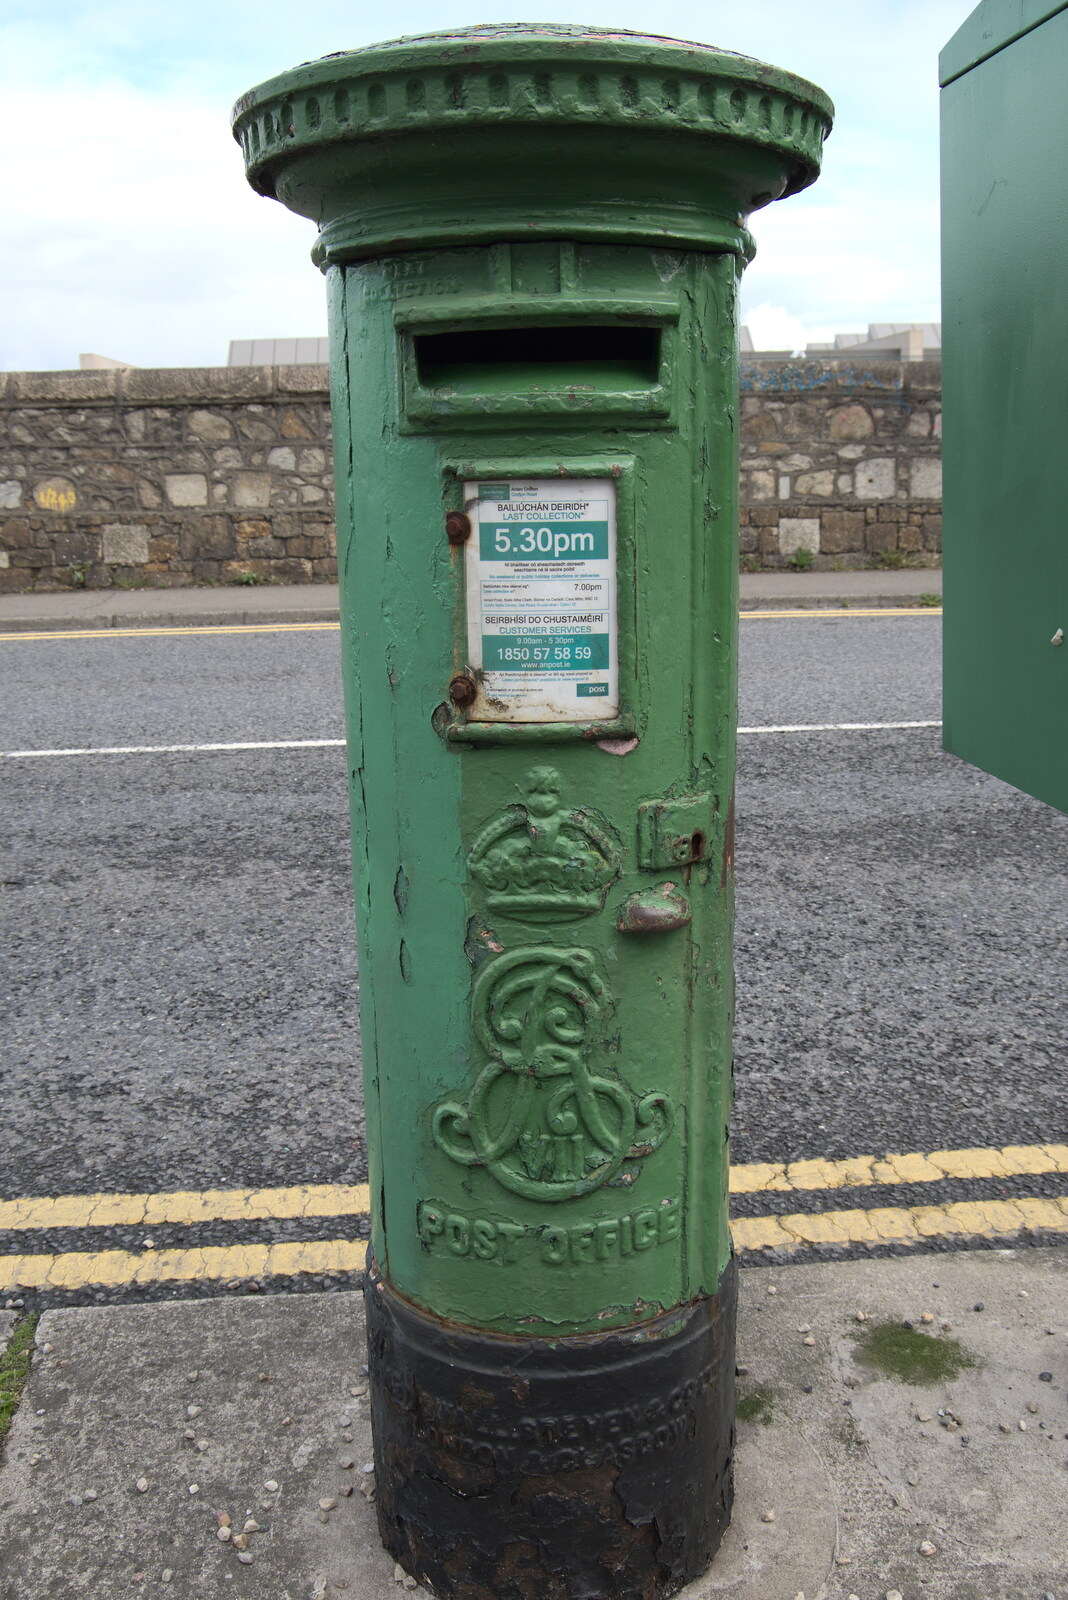 An Edward VII post box, painted green from Manorhamilton and the Street Art of Dún Laoghaire, Ireland - 15th August 2021